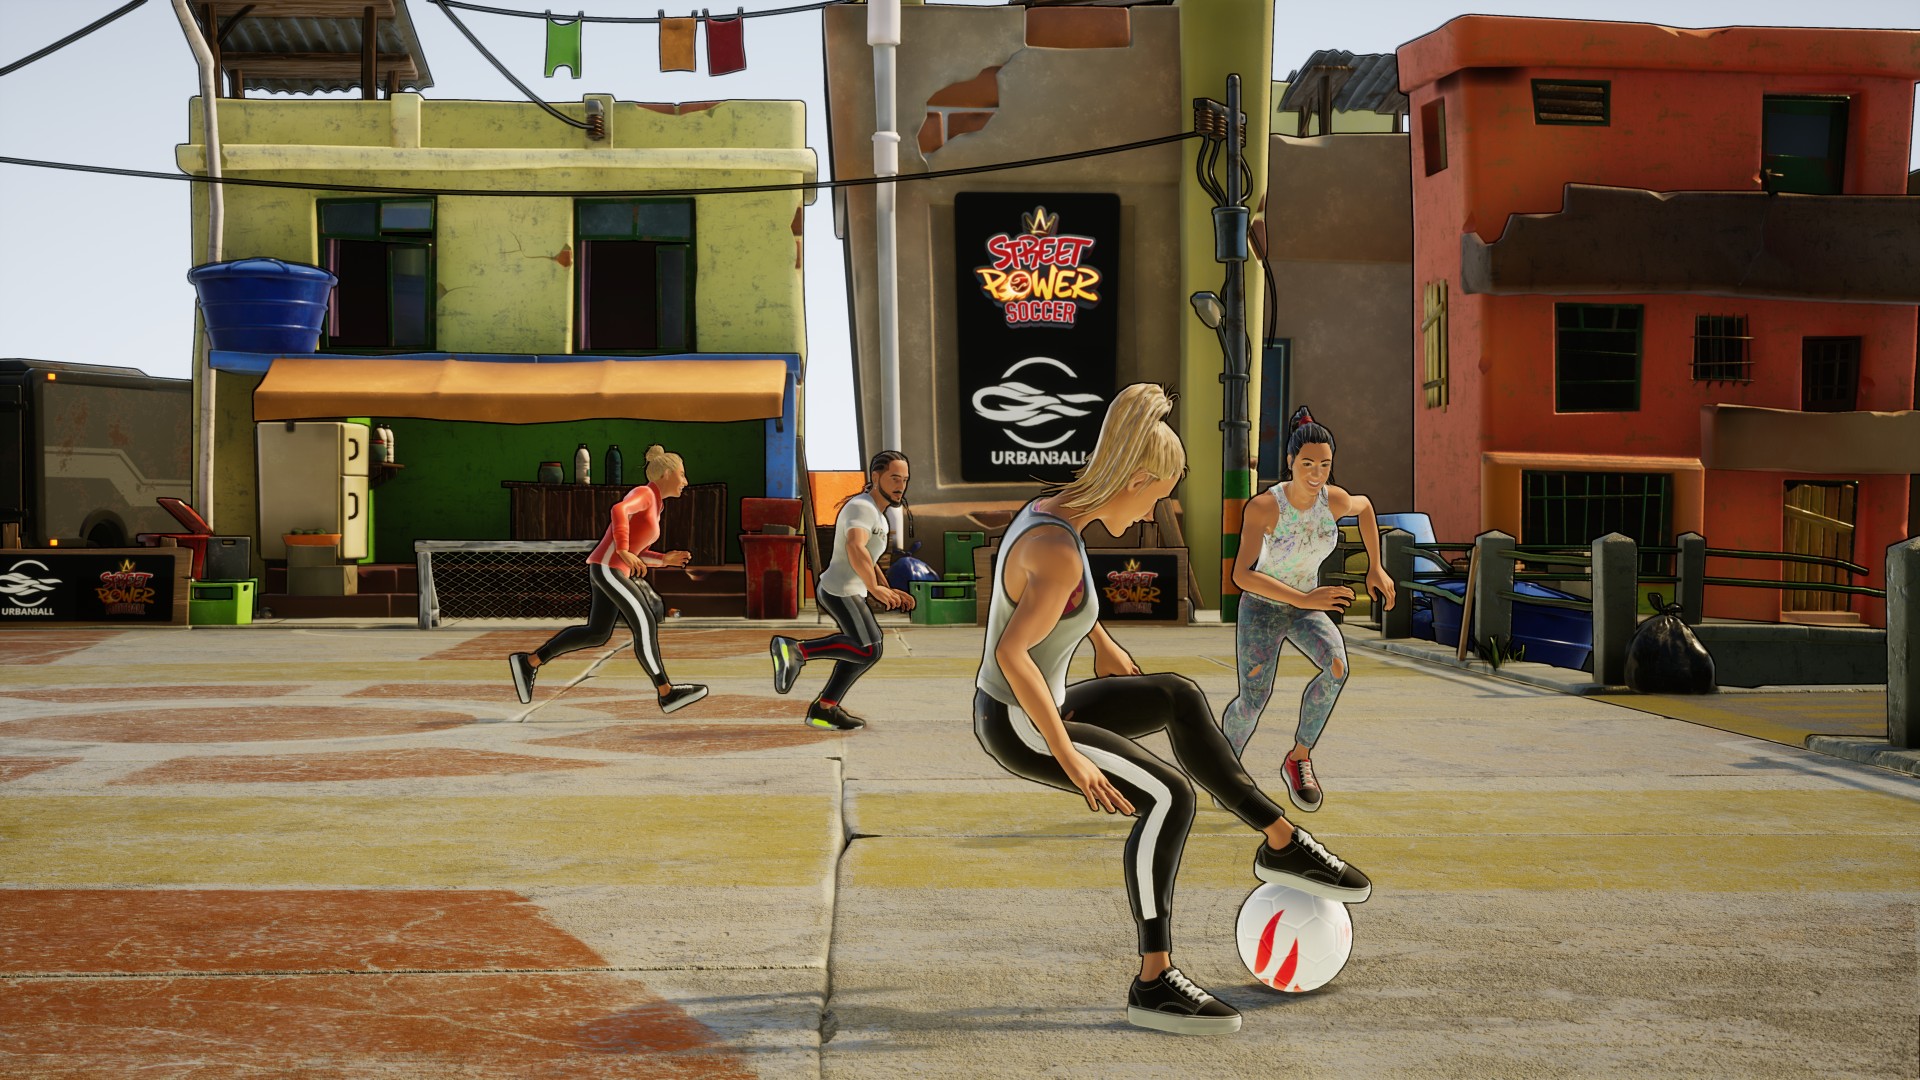 Street Power Soccer Is Bringing Over The Top Style And Arcade Action To Xbox One This Year Xbox Wire - super striker league charges into roblox on xbox one news break